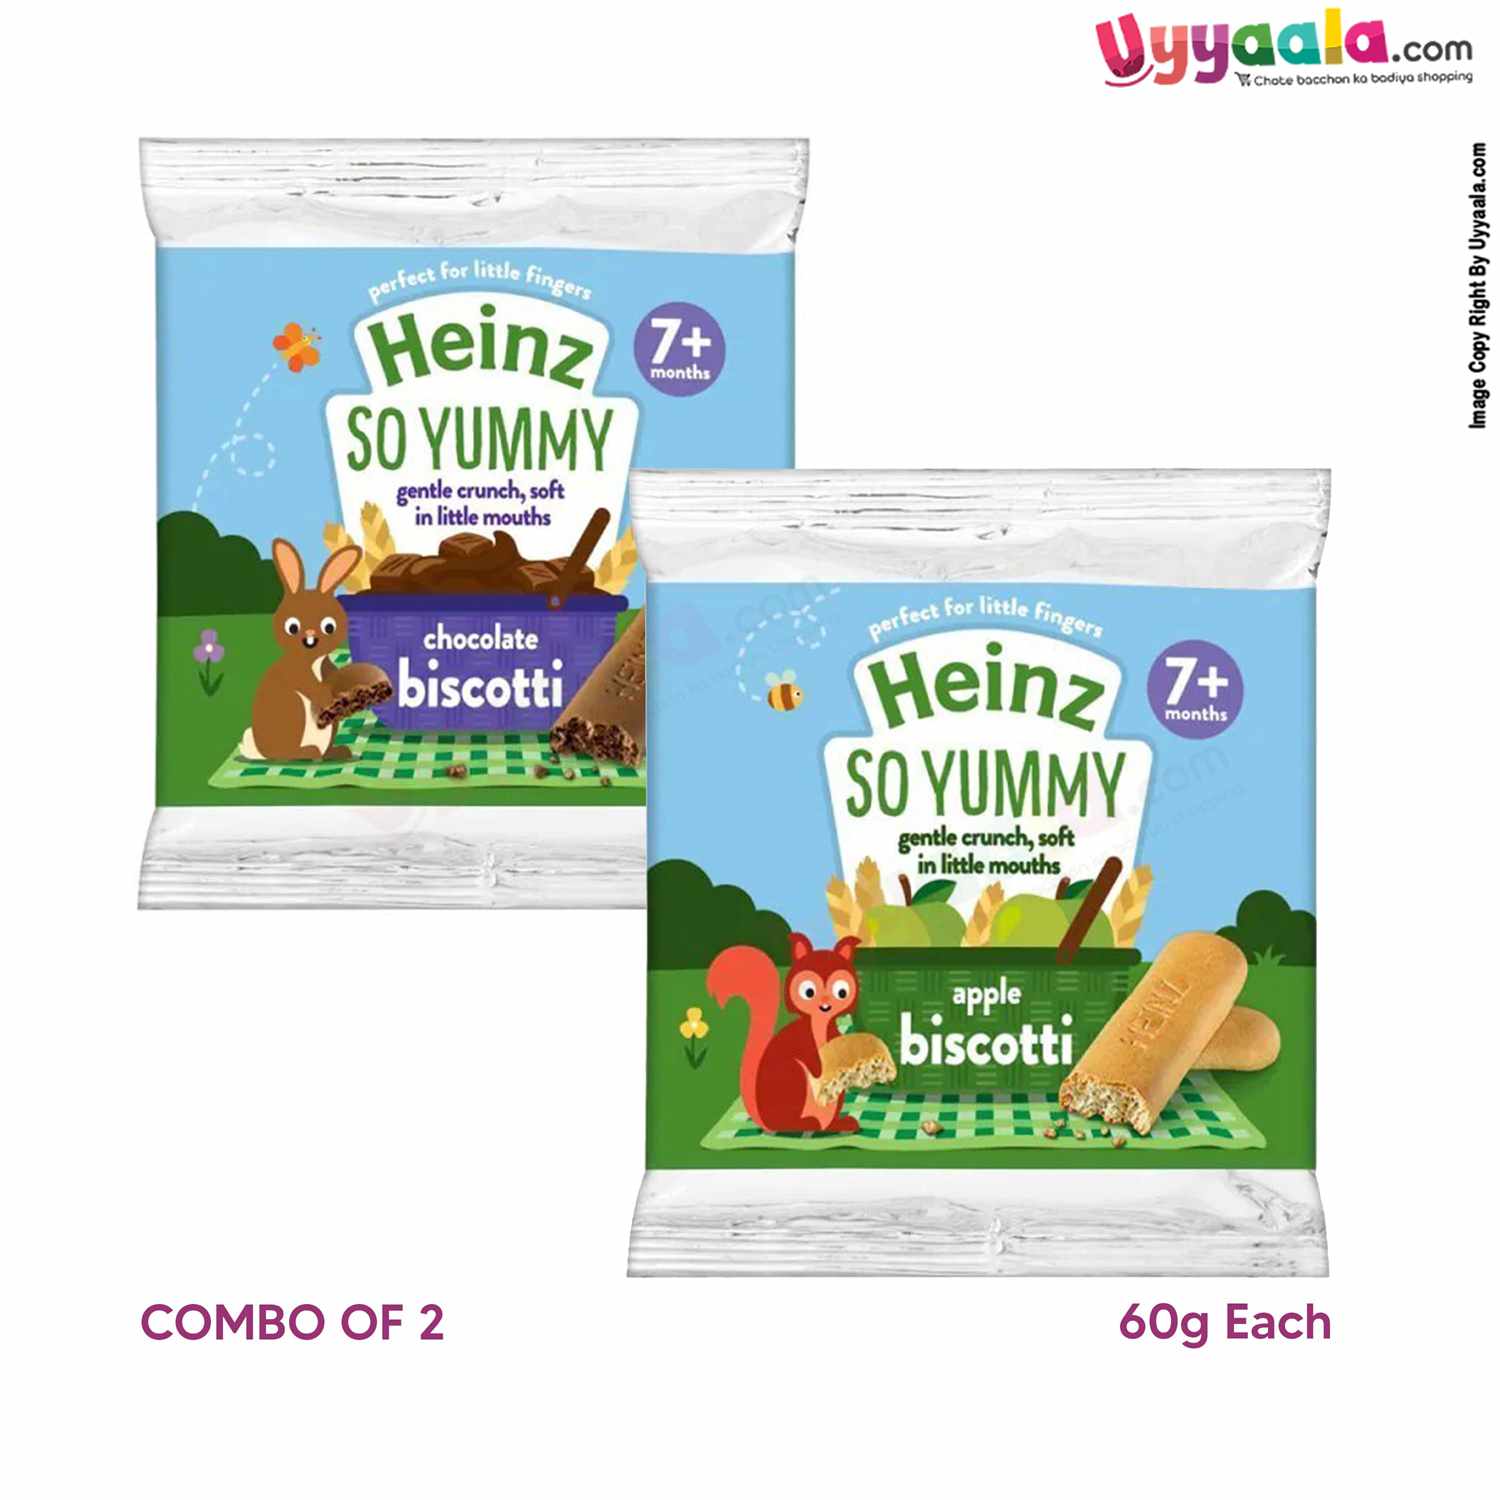 HEINZ SO YUMMY Chocolate & Apple biscotti for Kids snacks Combo of 2 - Chocolate & Apple Biscuits (60 g each), 7months+